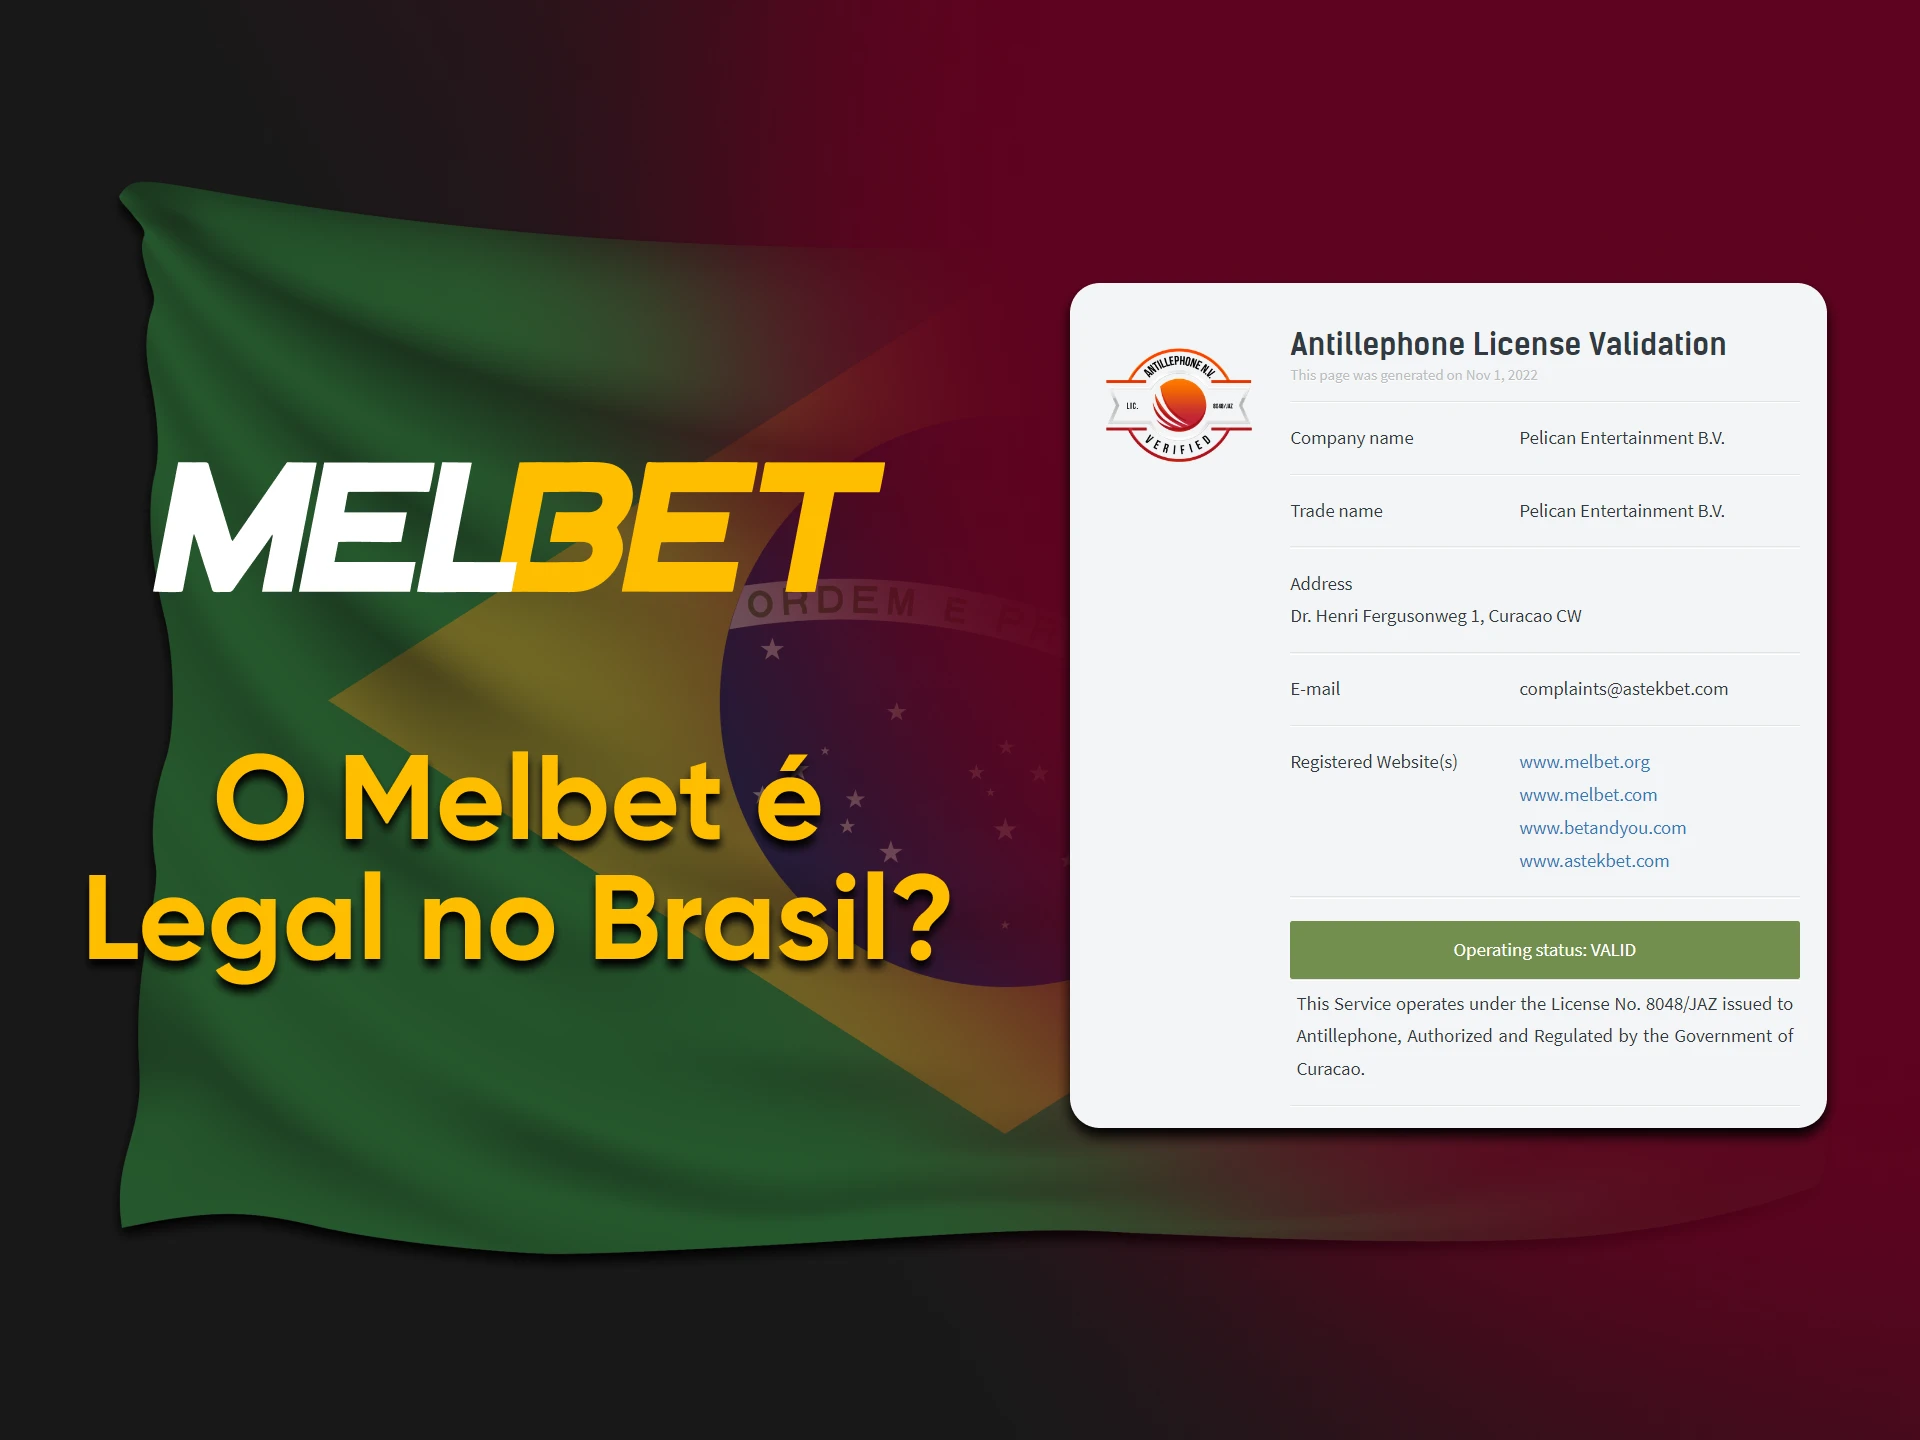 Melbet operates legally online as it has a license from Curacao.